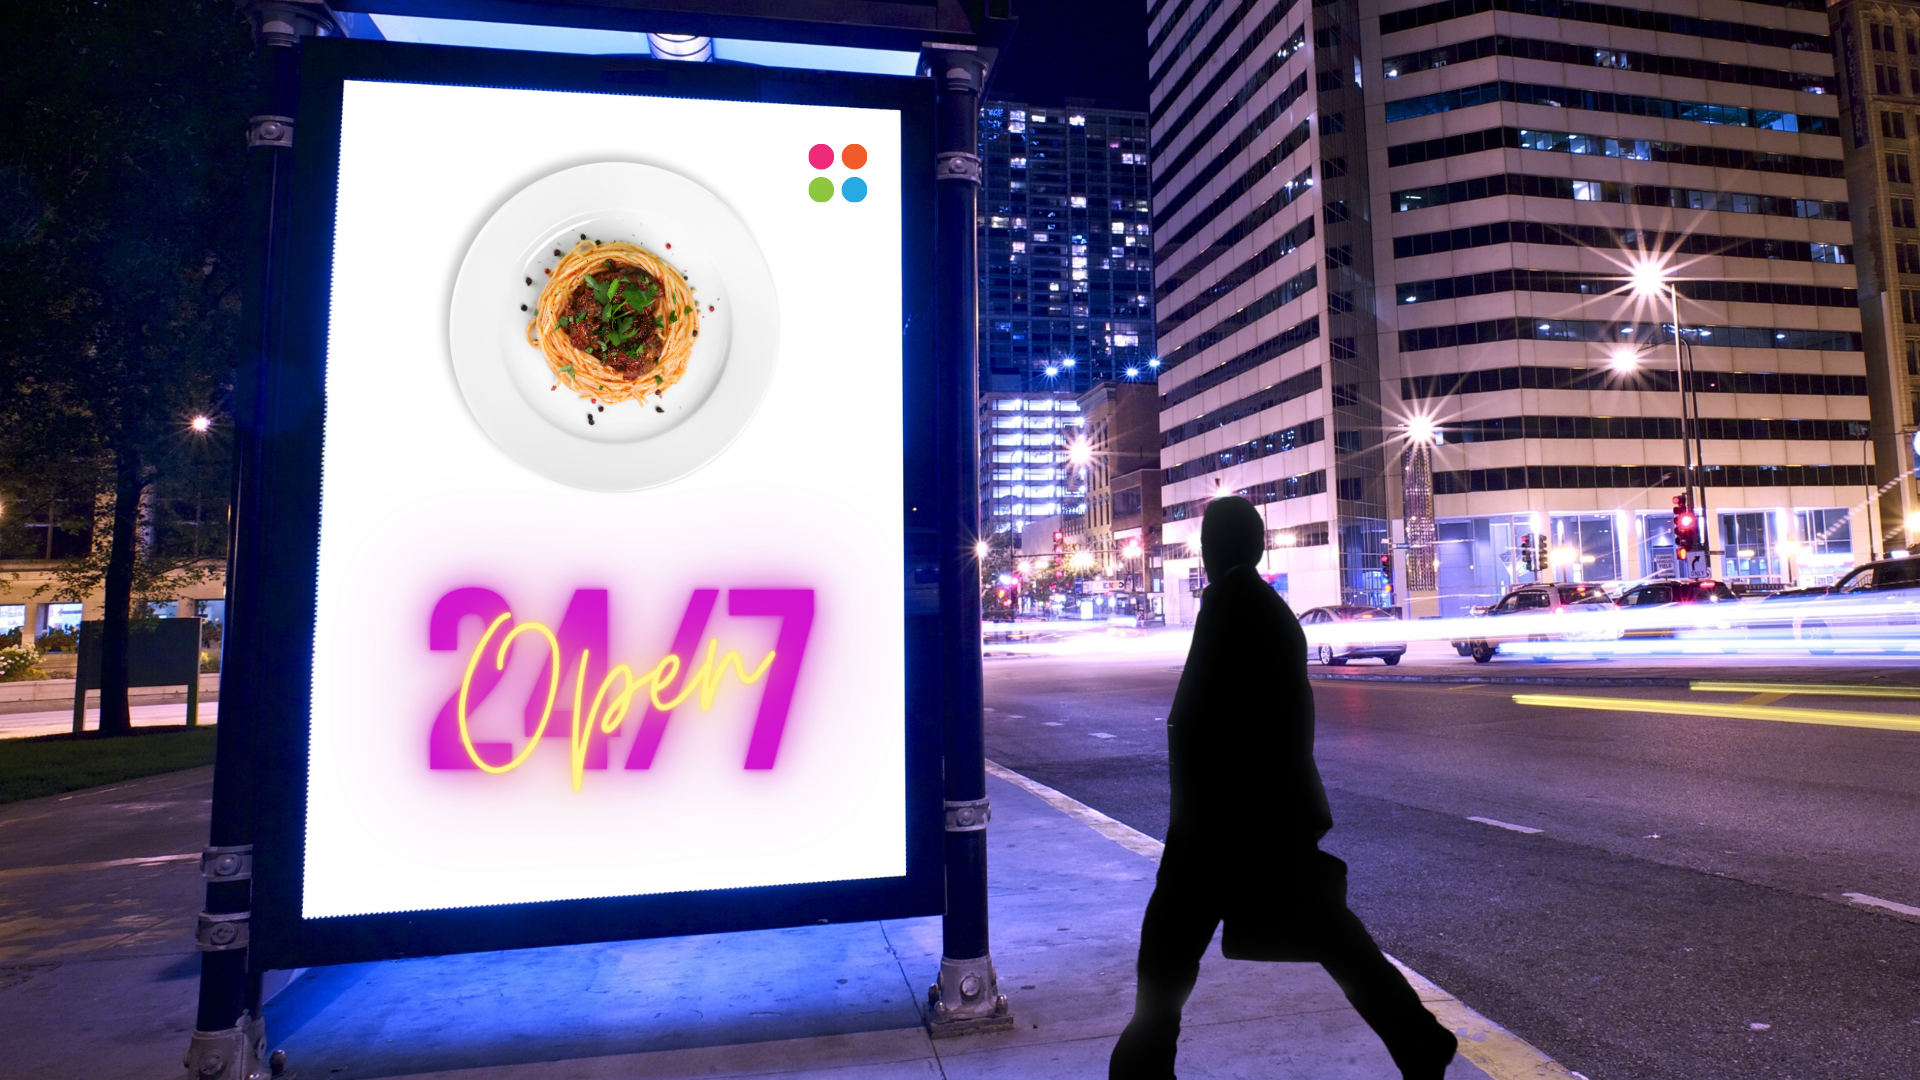 The dark silhouette of a man crossing an empty road appears to be staring at an outdoor digital signage display that shows the image of a nicely-plated spaghetti and the text ‘24/7 Open’. In the background, tall buildings and glowing street lights are partially visible.